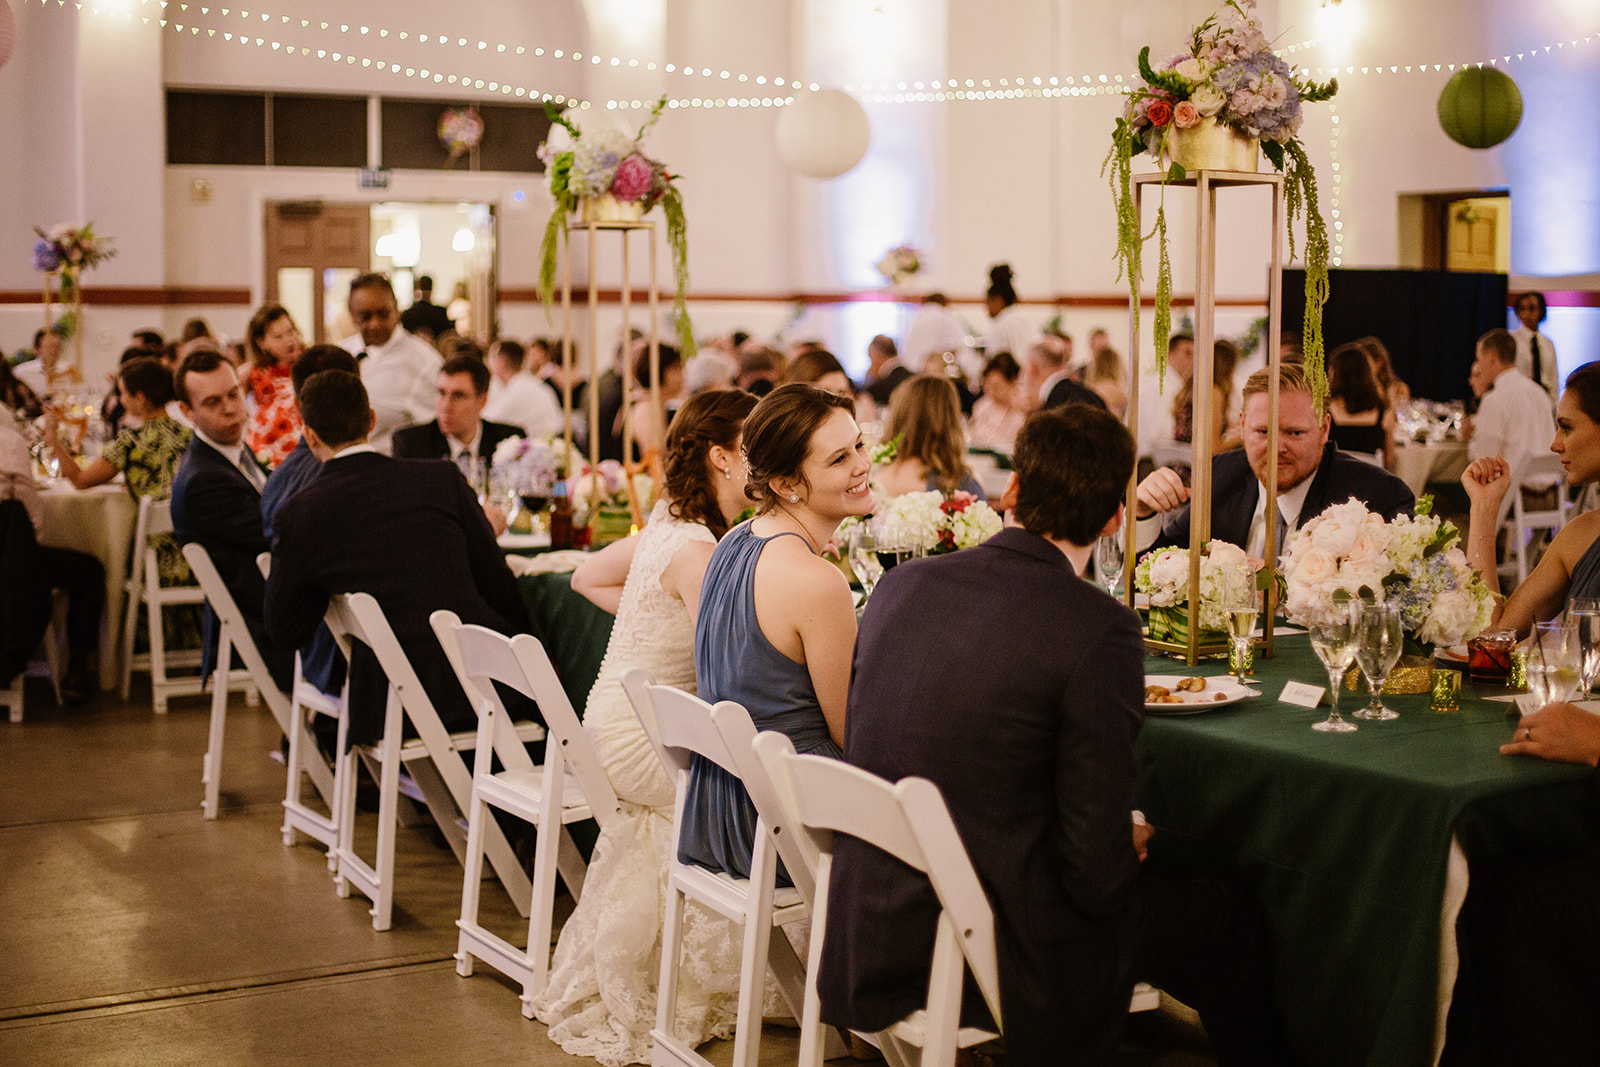  Wedding reception at Eastern Market in Washington D.C. Irish wedding with green and gold accents. Sarah Mattozzi Photography. 